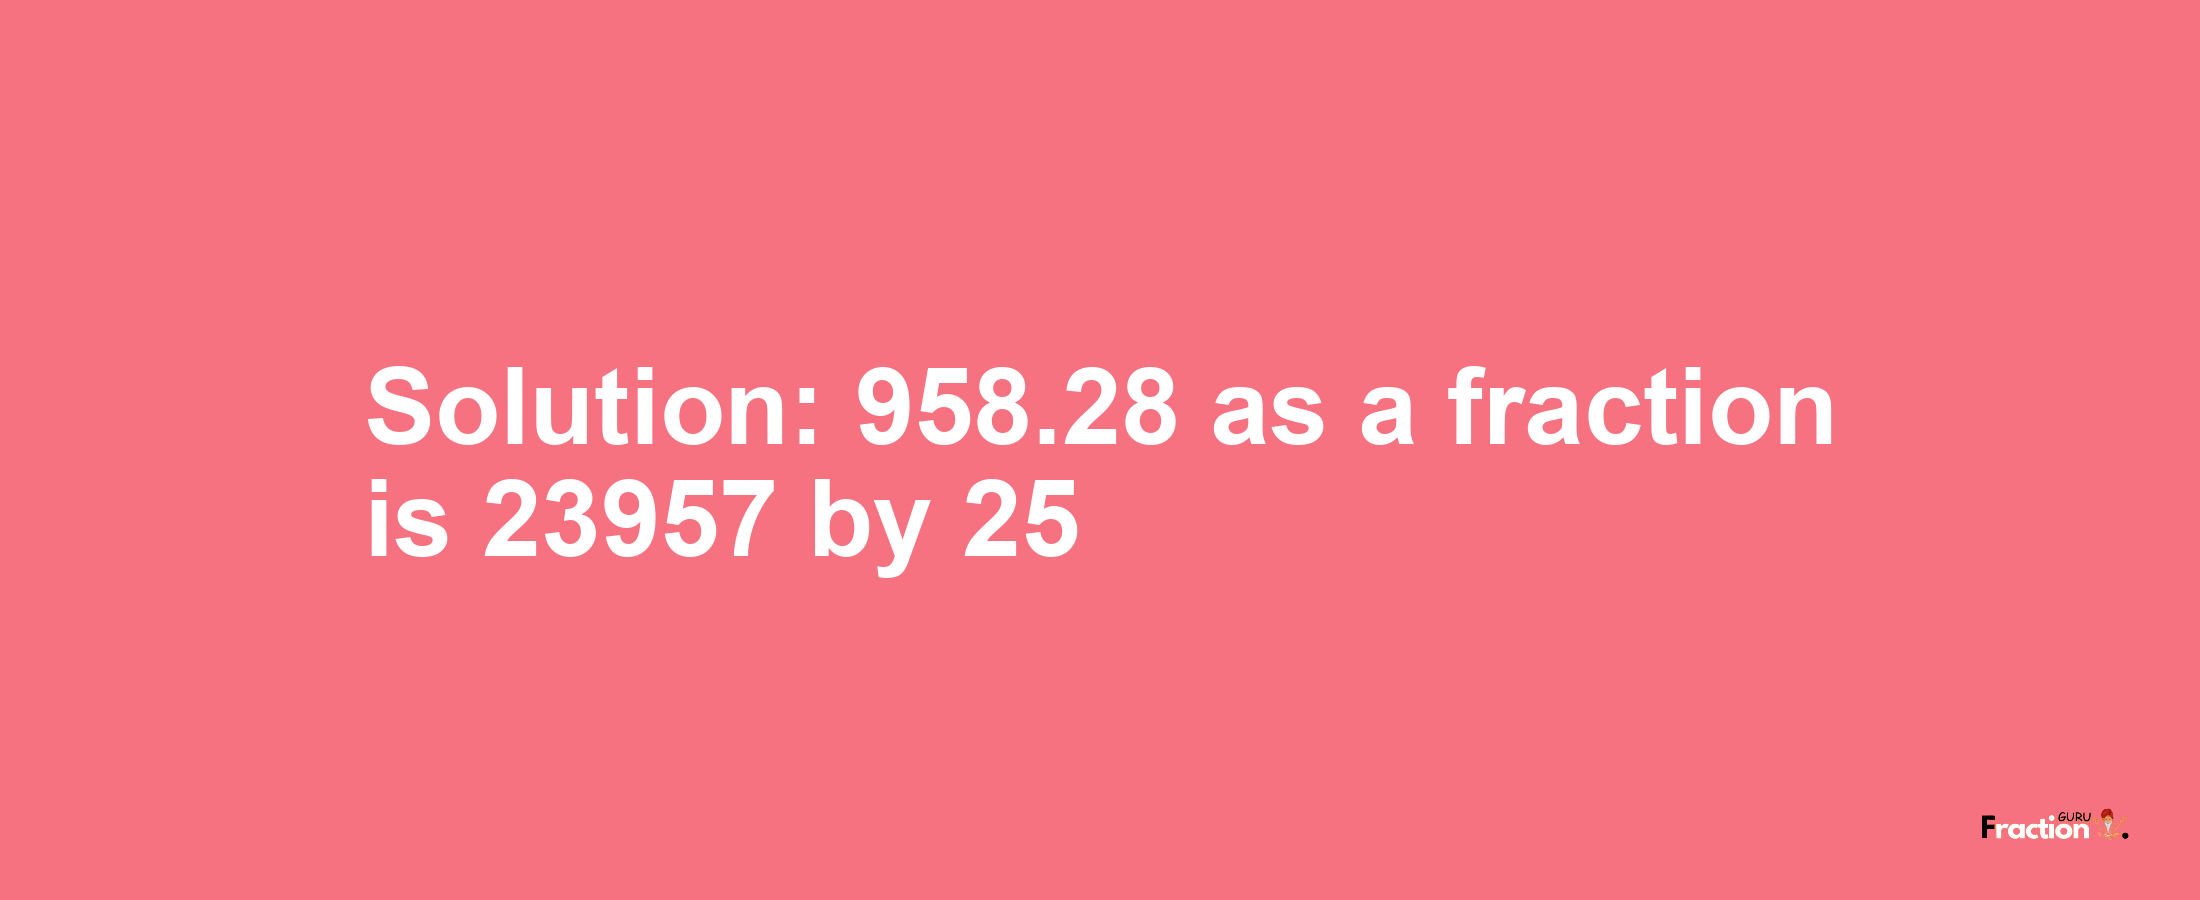 Solution:958.28 as a fraction is 23957/25